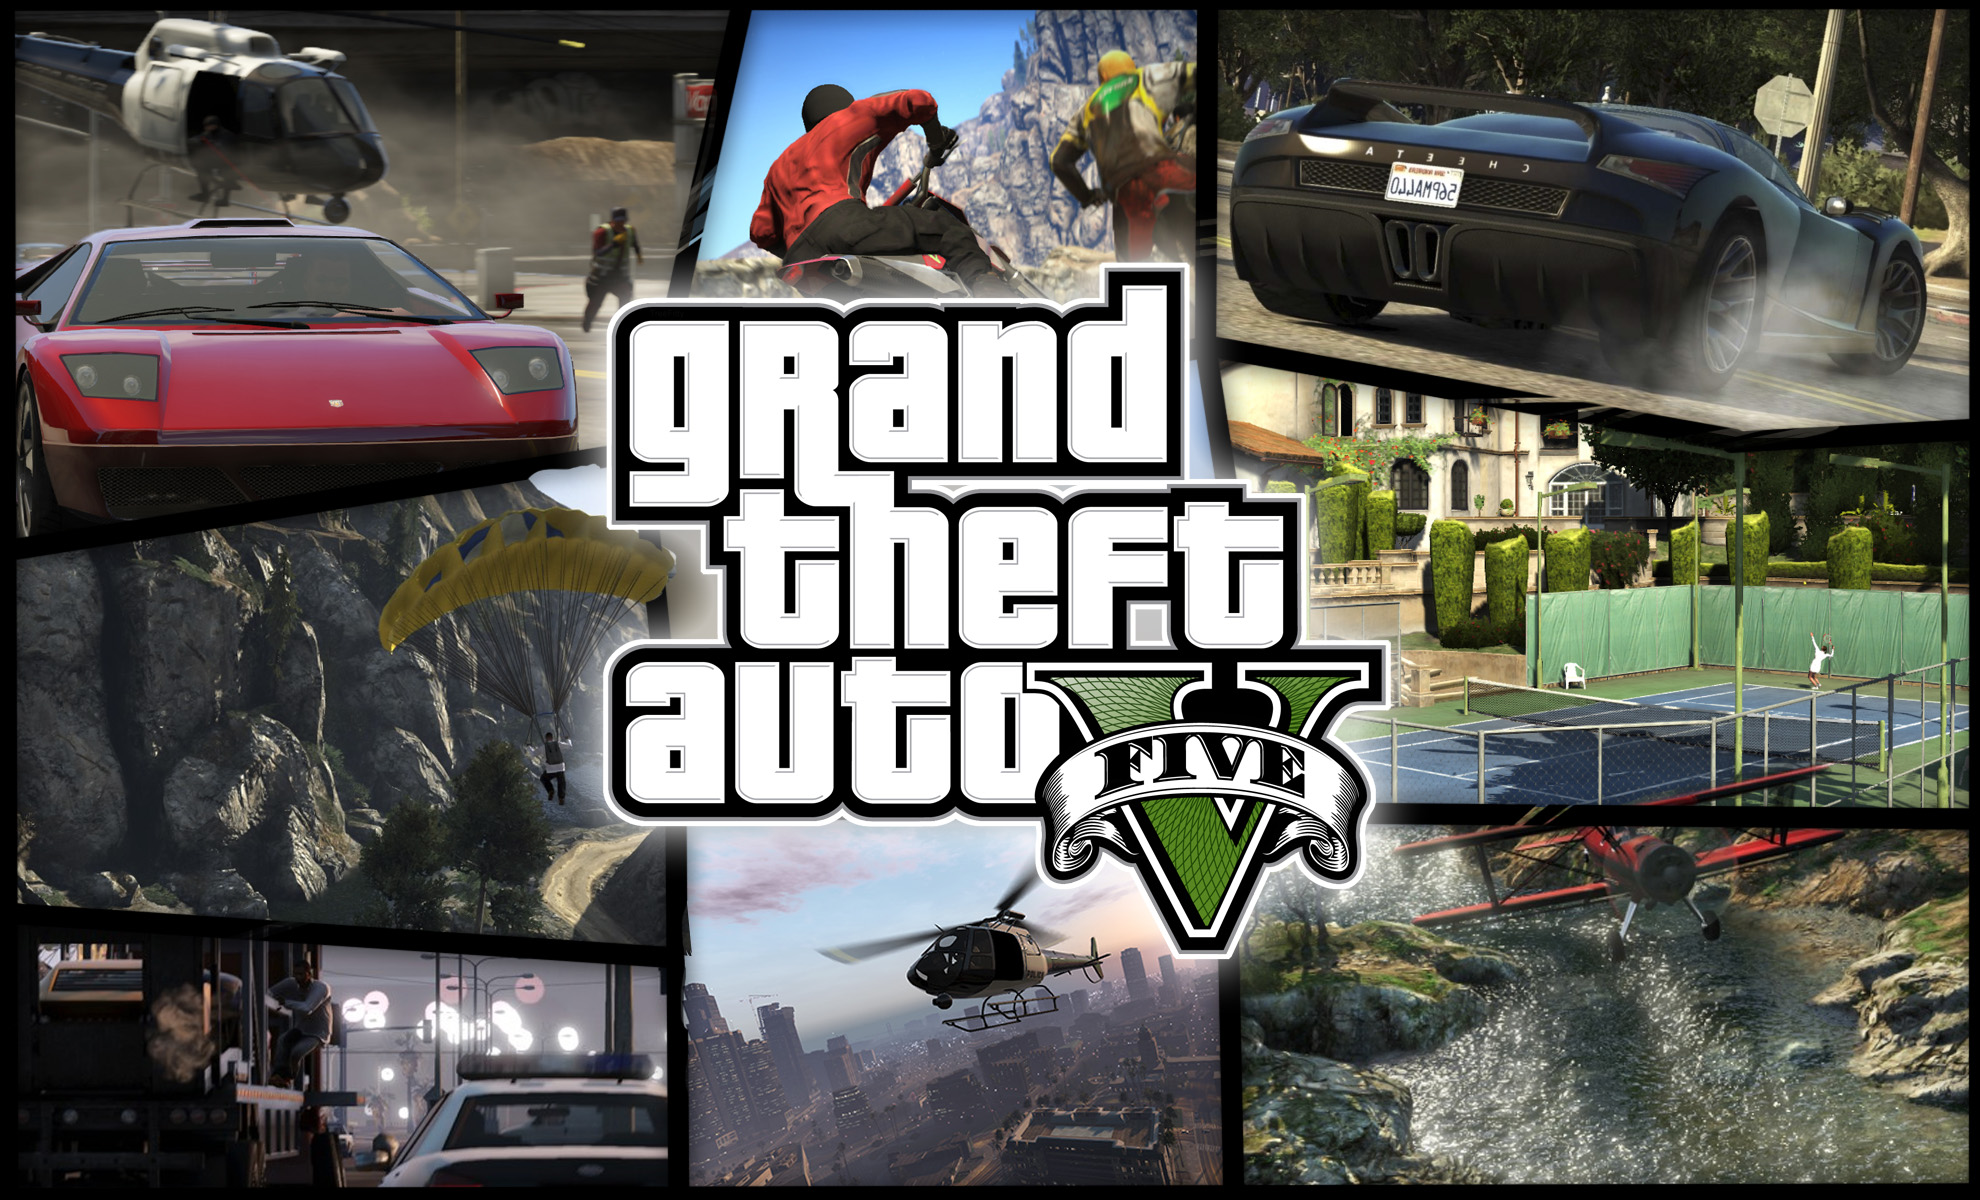 Everyone knew that Grand Theft Auto V was going to be popular but